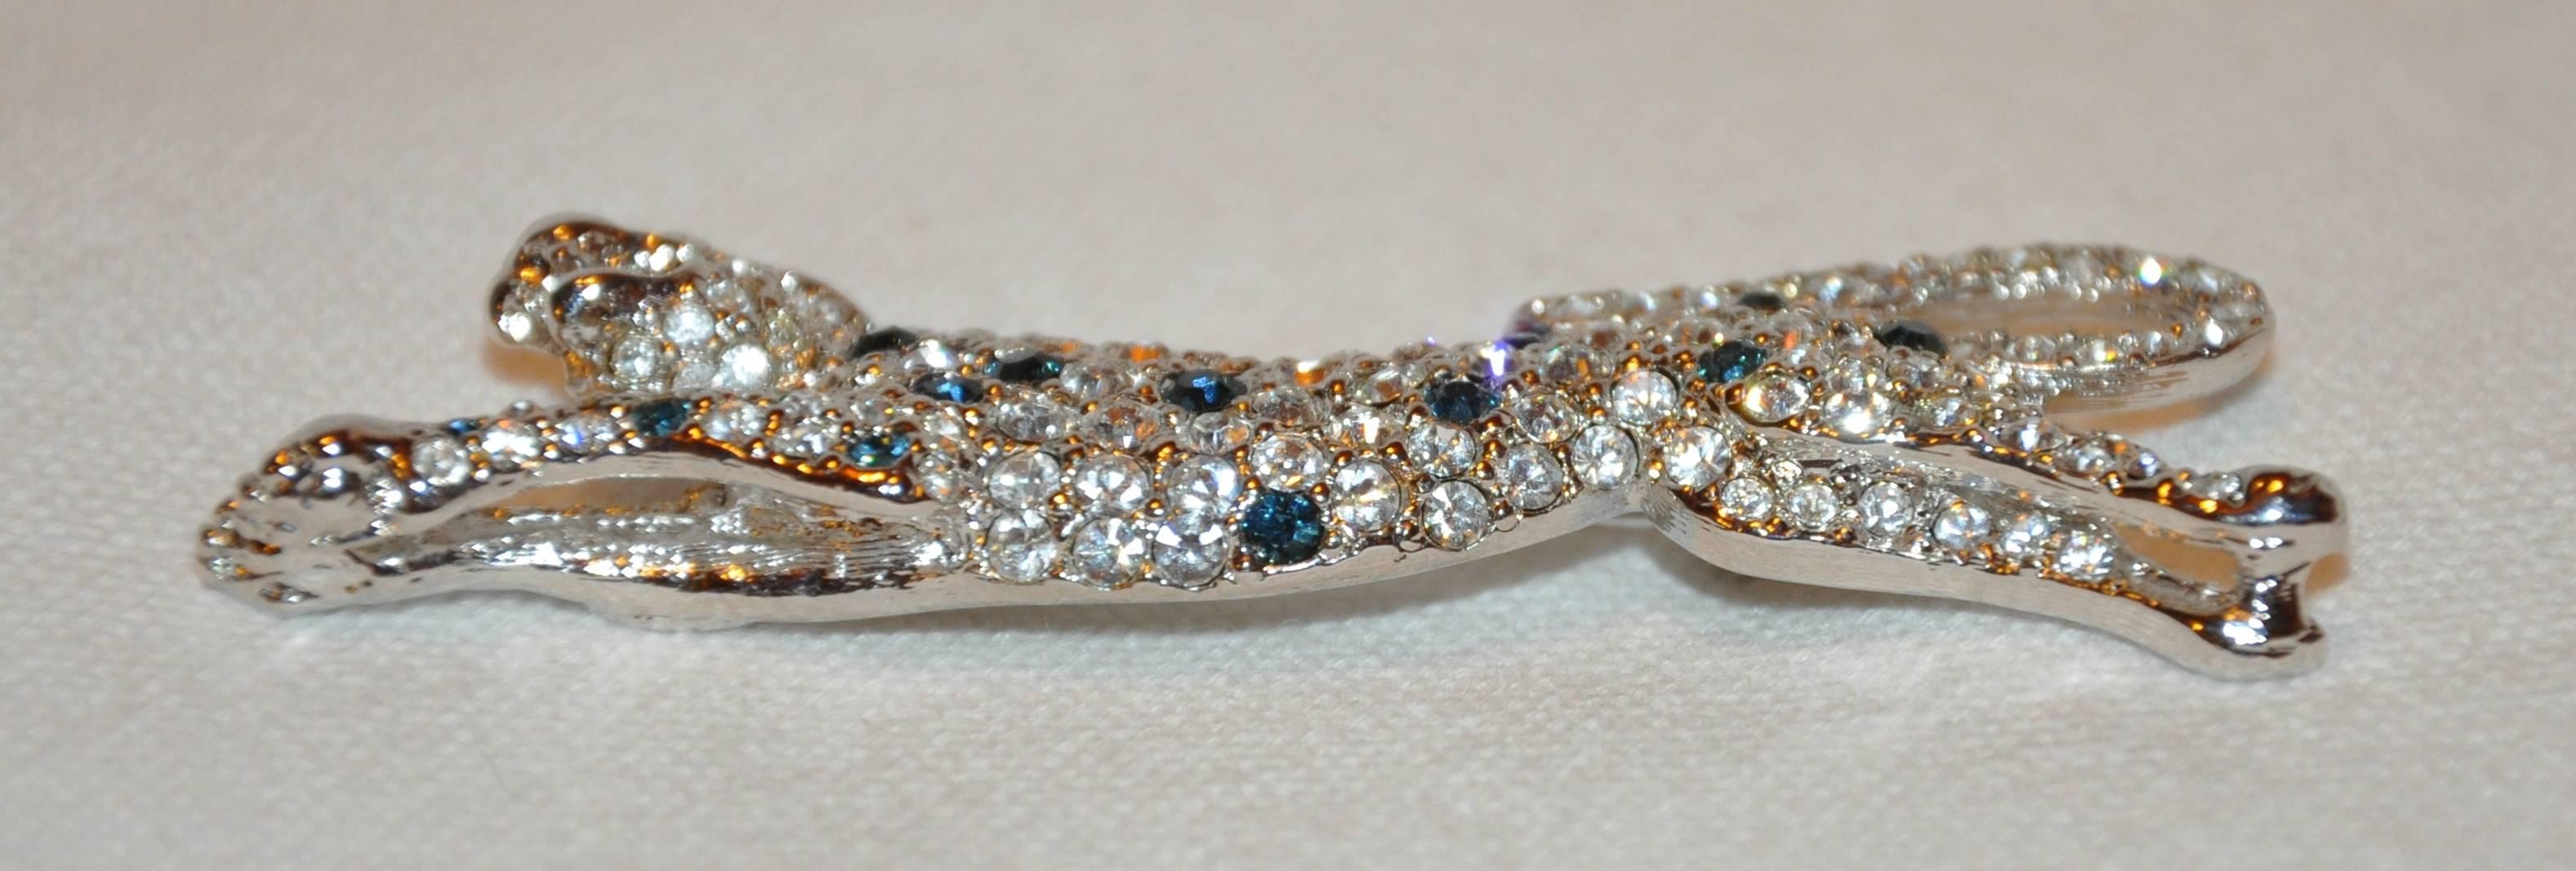        Kenneth Jay Lane wonderfully elegant Jaguar in polished silver vermeil finished hardware detailed with faux diamonds and faux sapphires makes for a chic brooch. The brooch measures 2 3/4" in length and 1" in width. Made in United